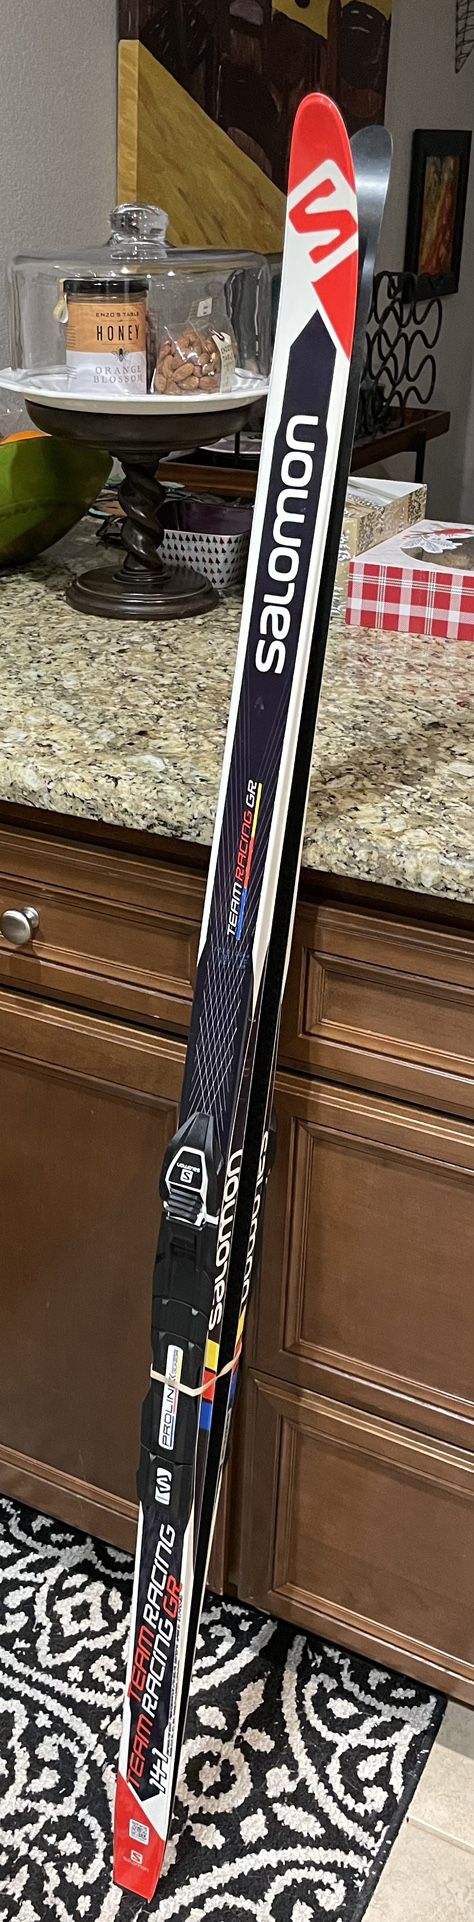 Salomon youth Cross Country Skis - 